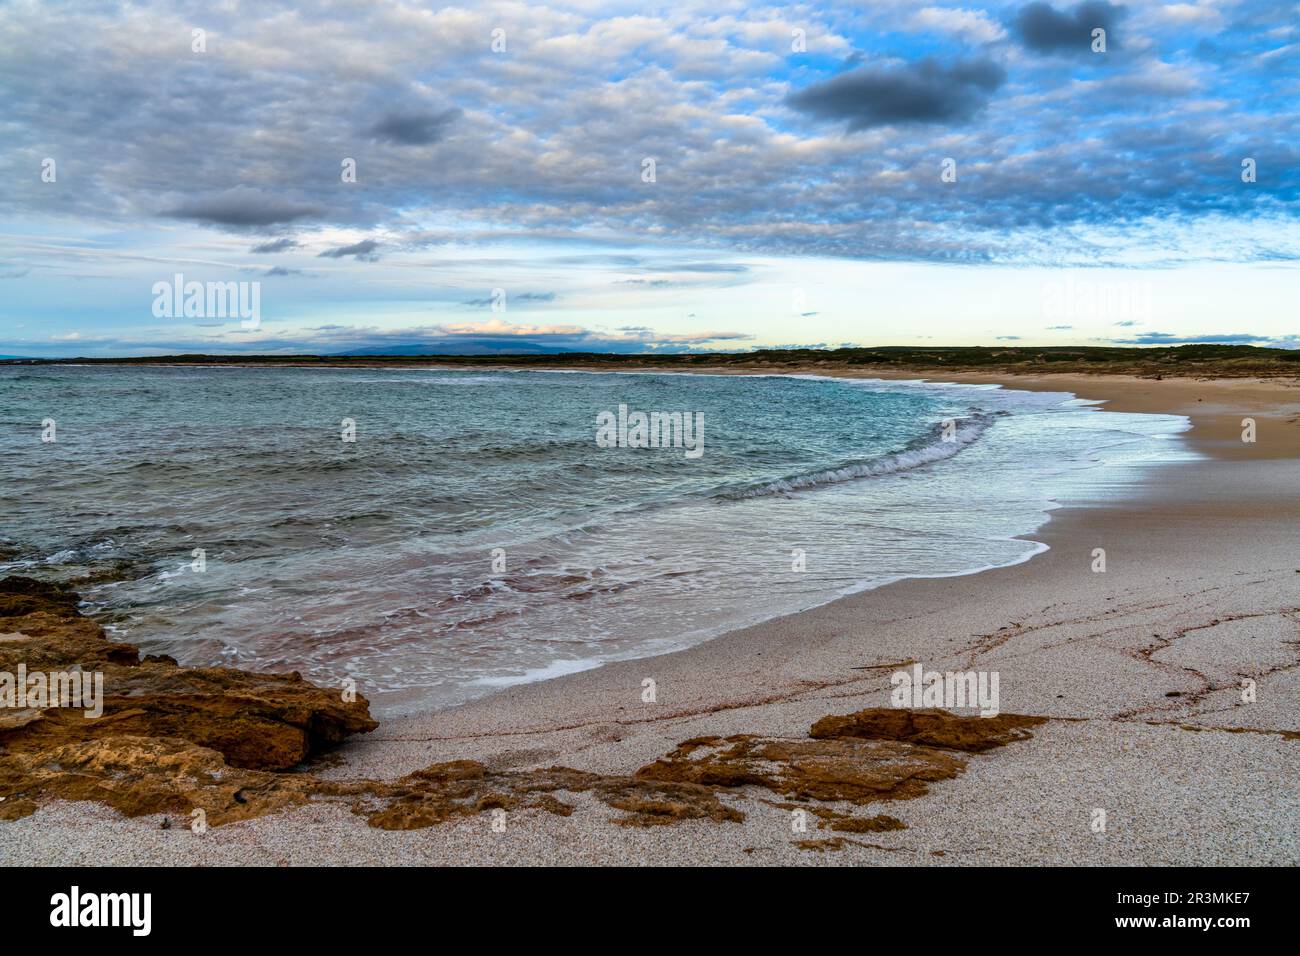 A view of the nature reserve and beach of Maimoni on the Gulf of Oristano in Sardinia Stock Photo